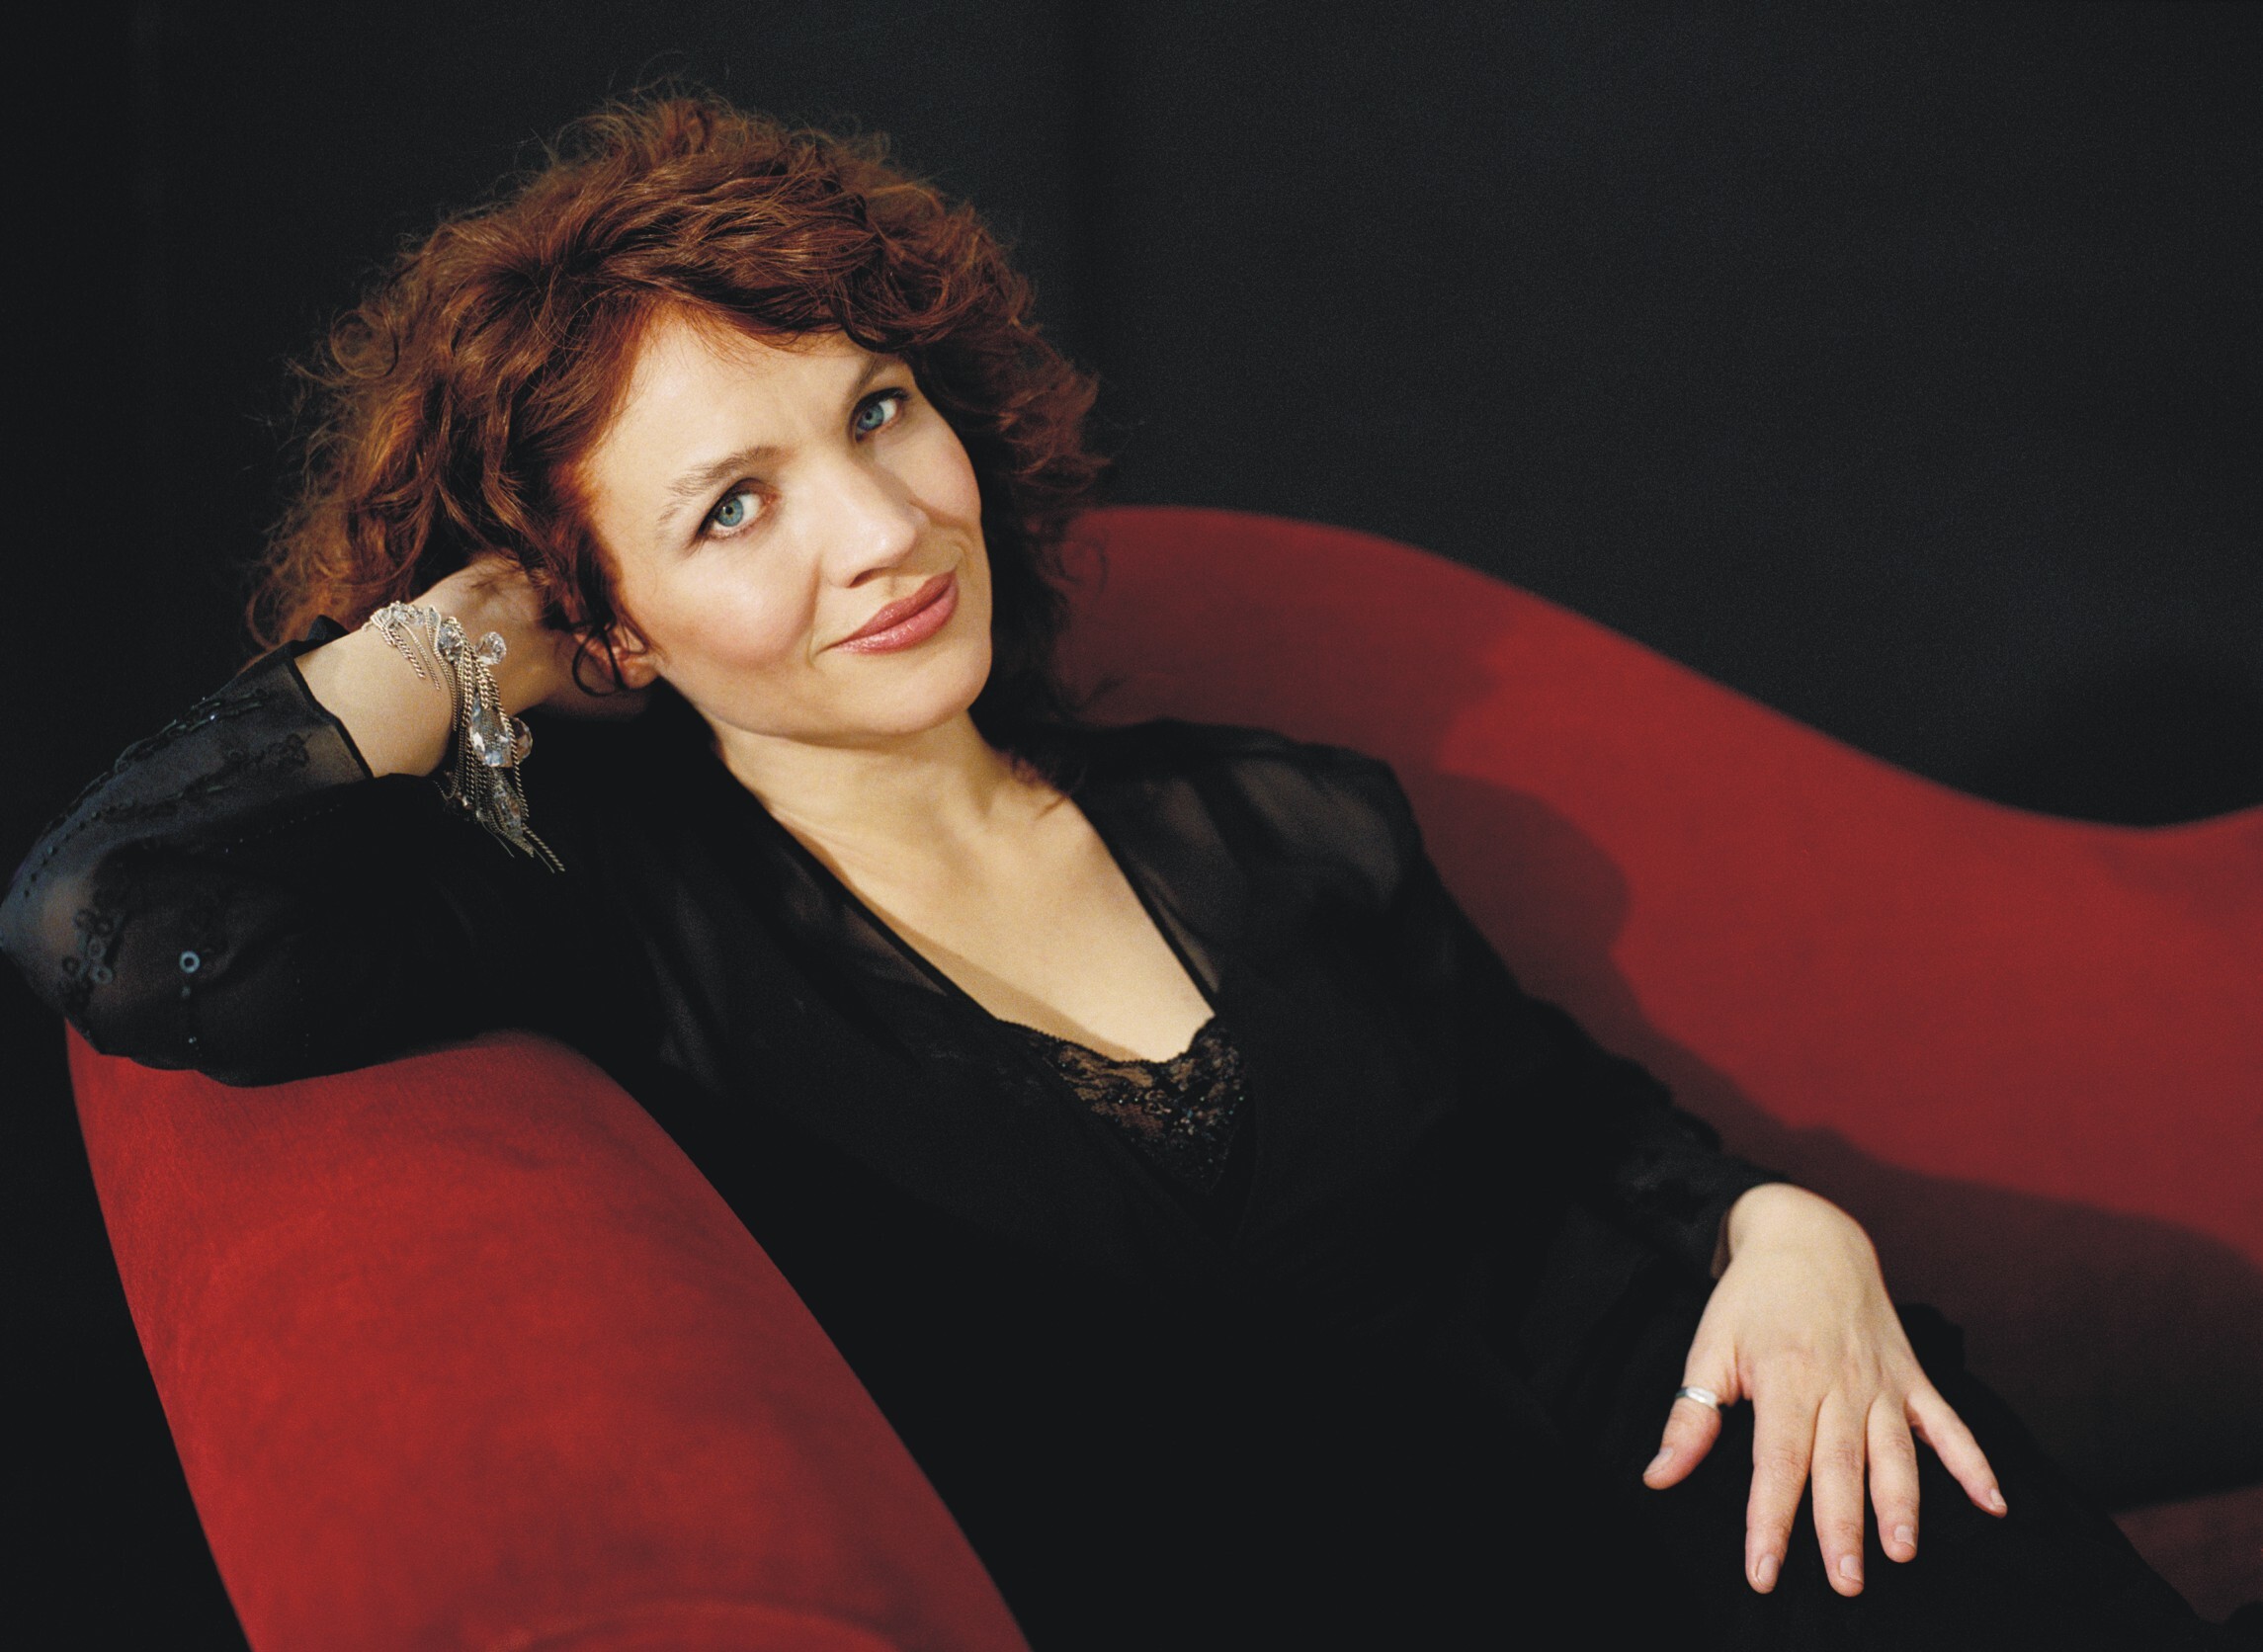 An image of Jacqui Dankworth lying on a red chair with one hand behind her head. She is wearing a black dress.